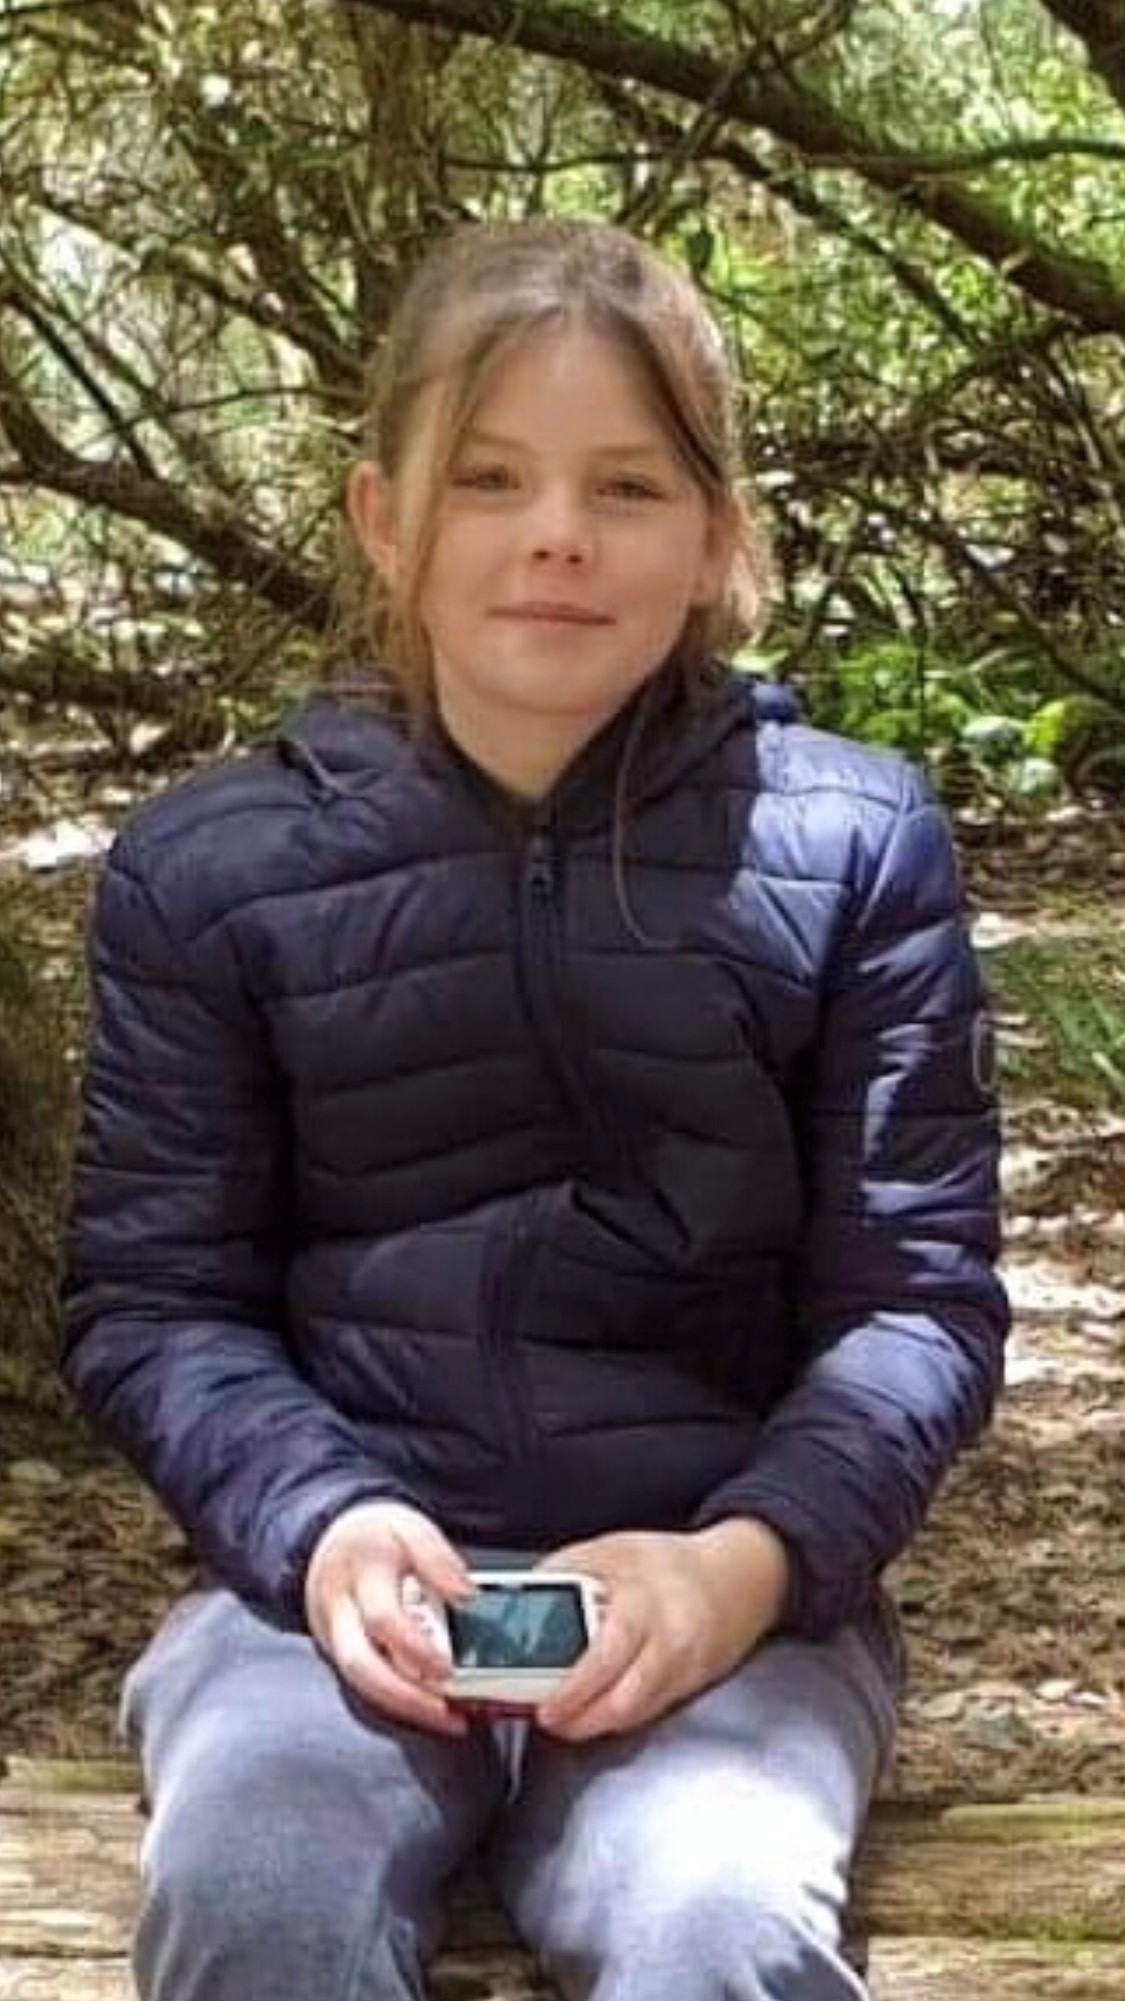 Police appeal for missing children, potentially in Goulburn or Crookwell